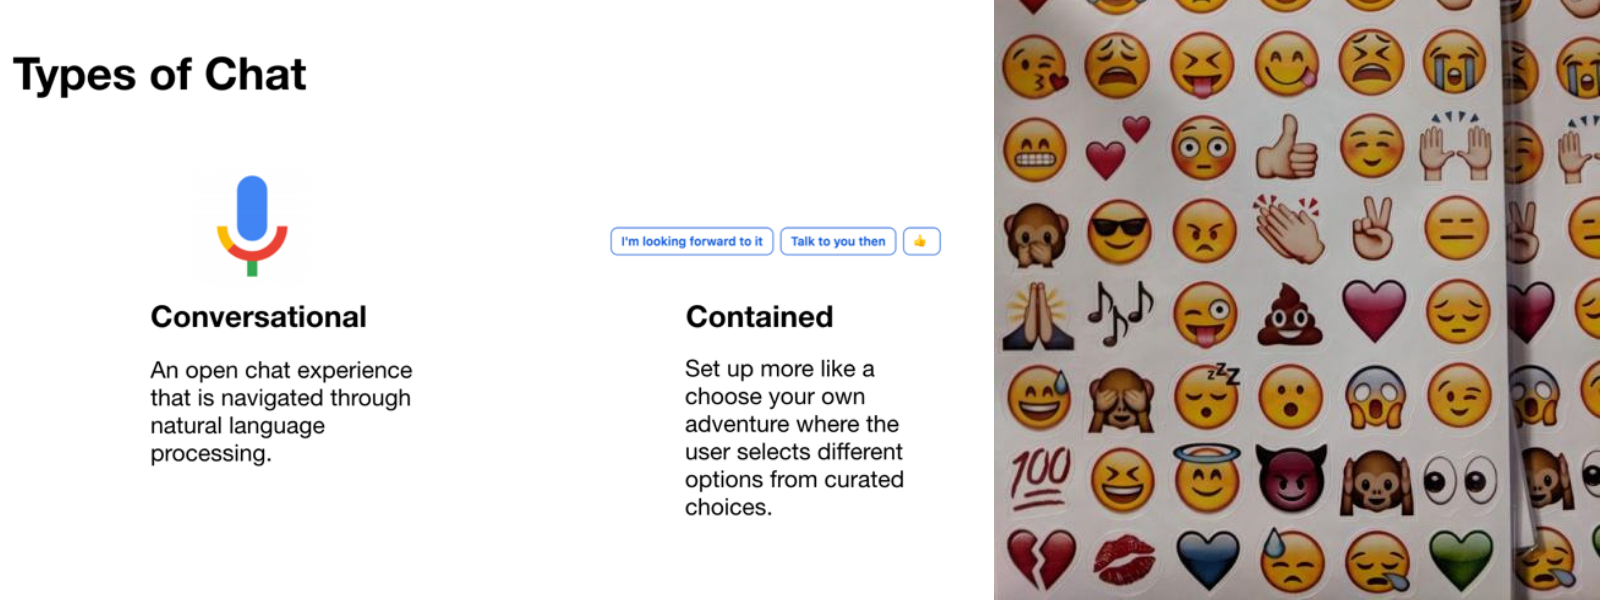 screen grab of types of chat and picture of emoji stickers